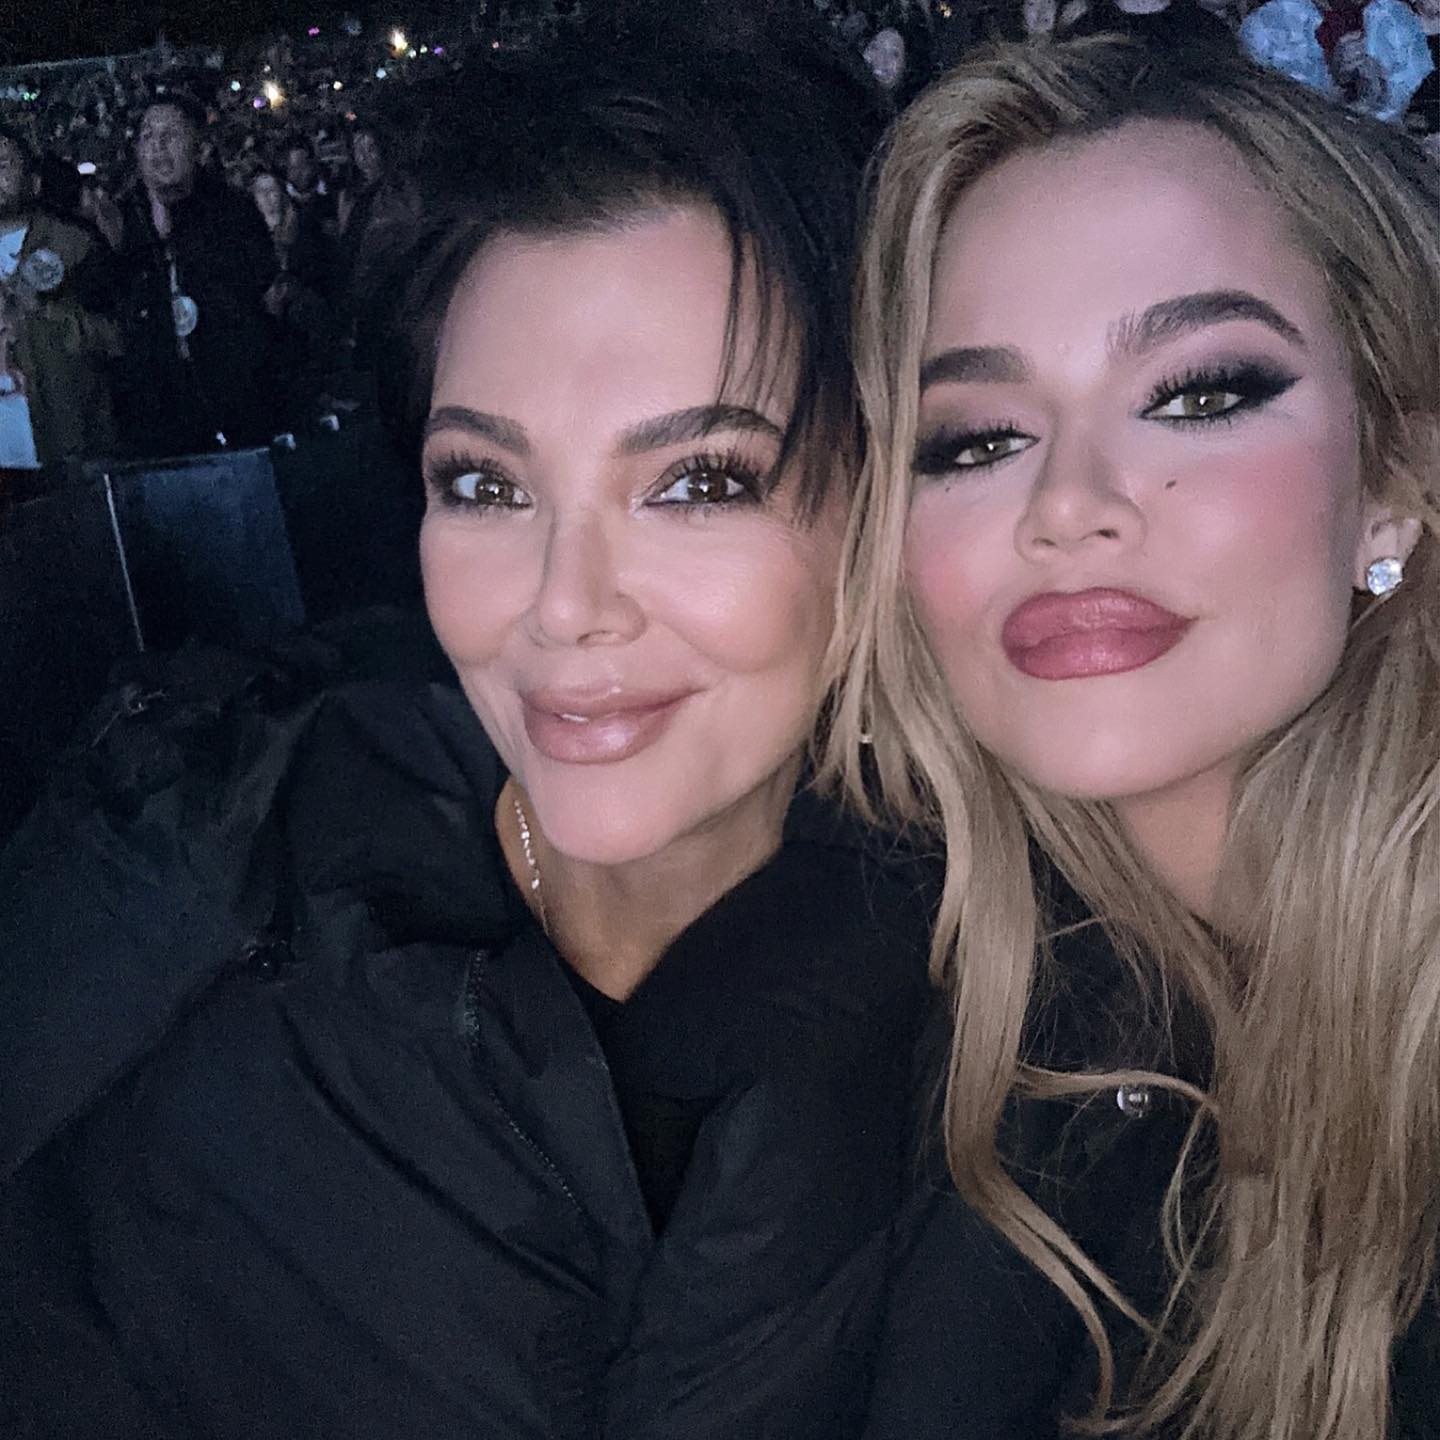 Kris previously showed gratitude for having Khloe help her around the house when Khloe was a young girl